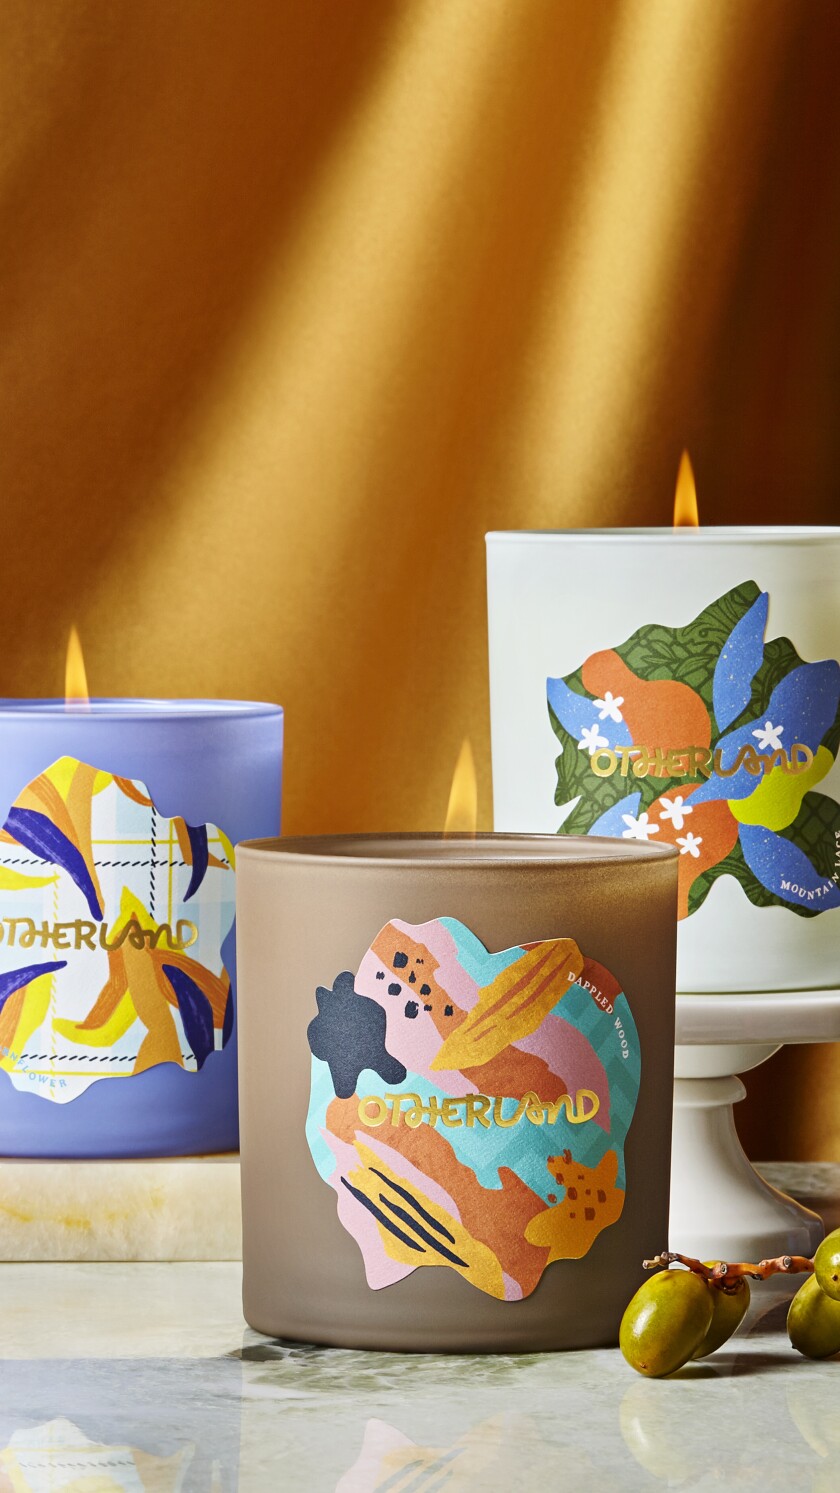 A collection of seasonal scented candles is on display.